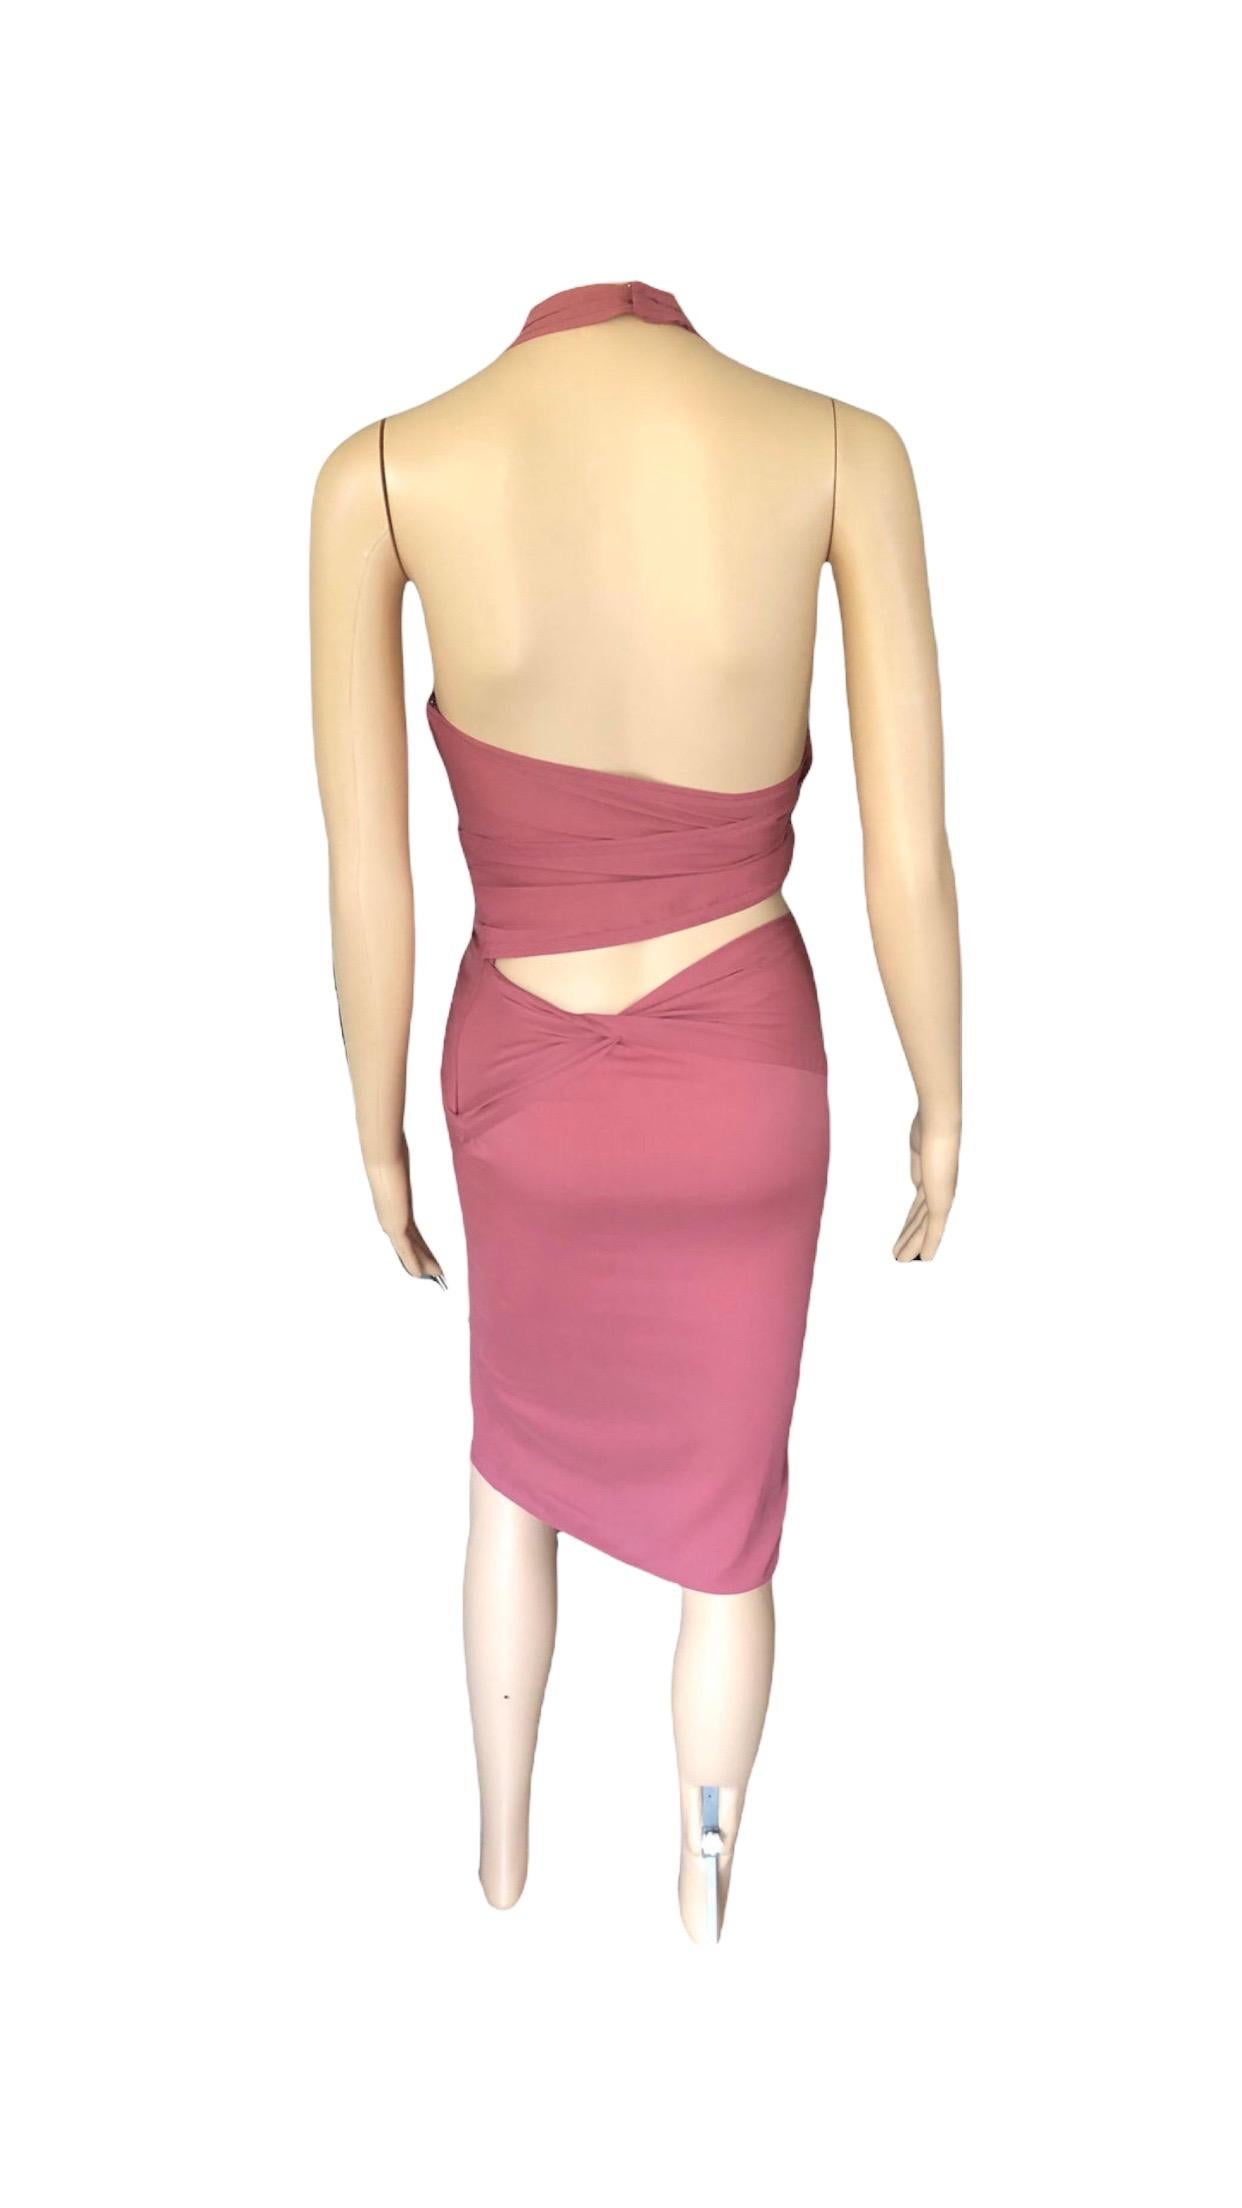 Gucci S/S 2005 Plunging Halter Cutout Back Silk Dress 1